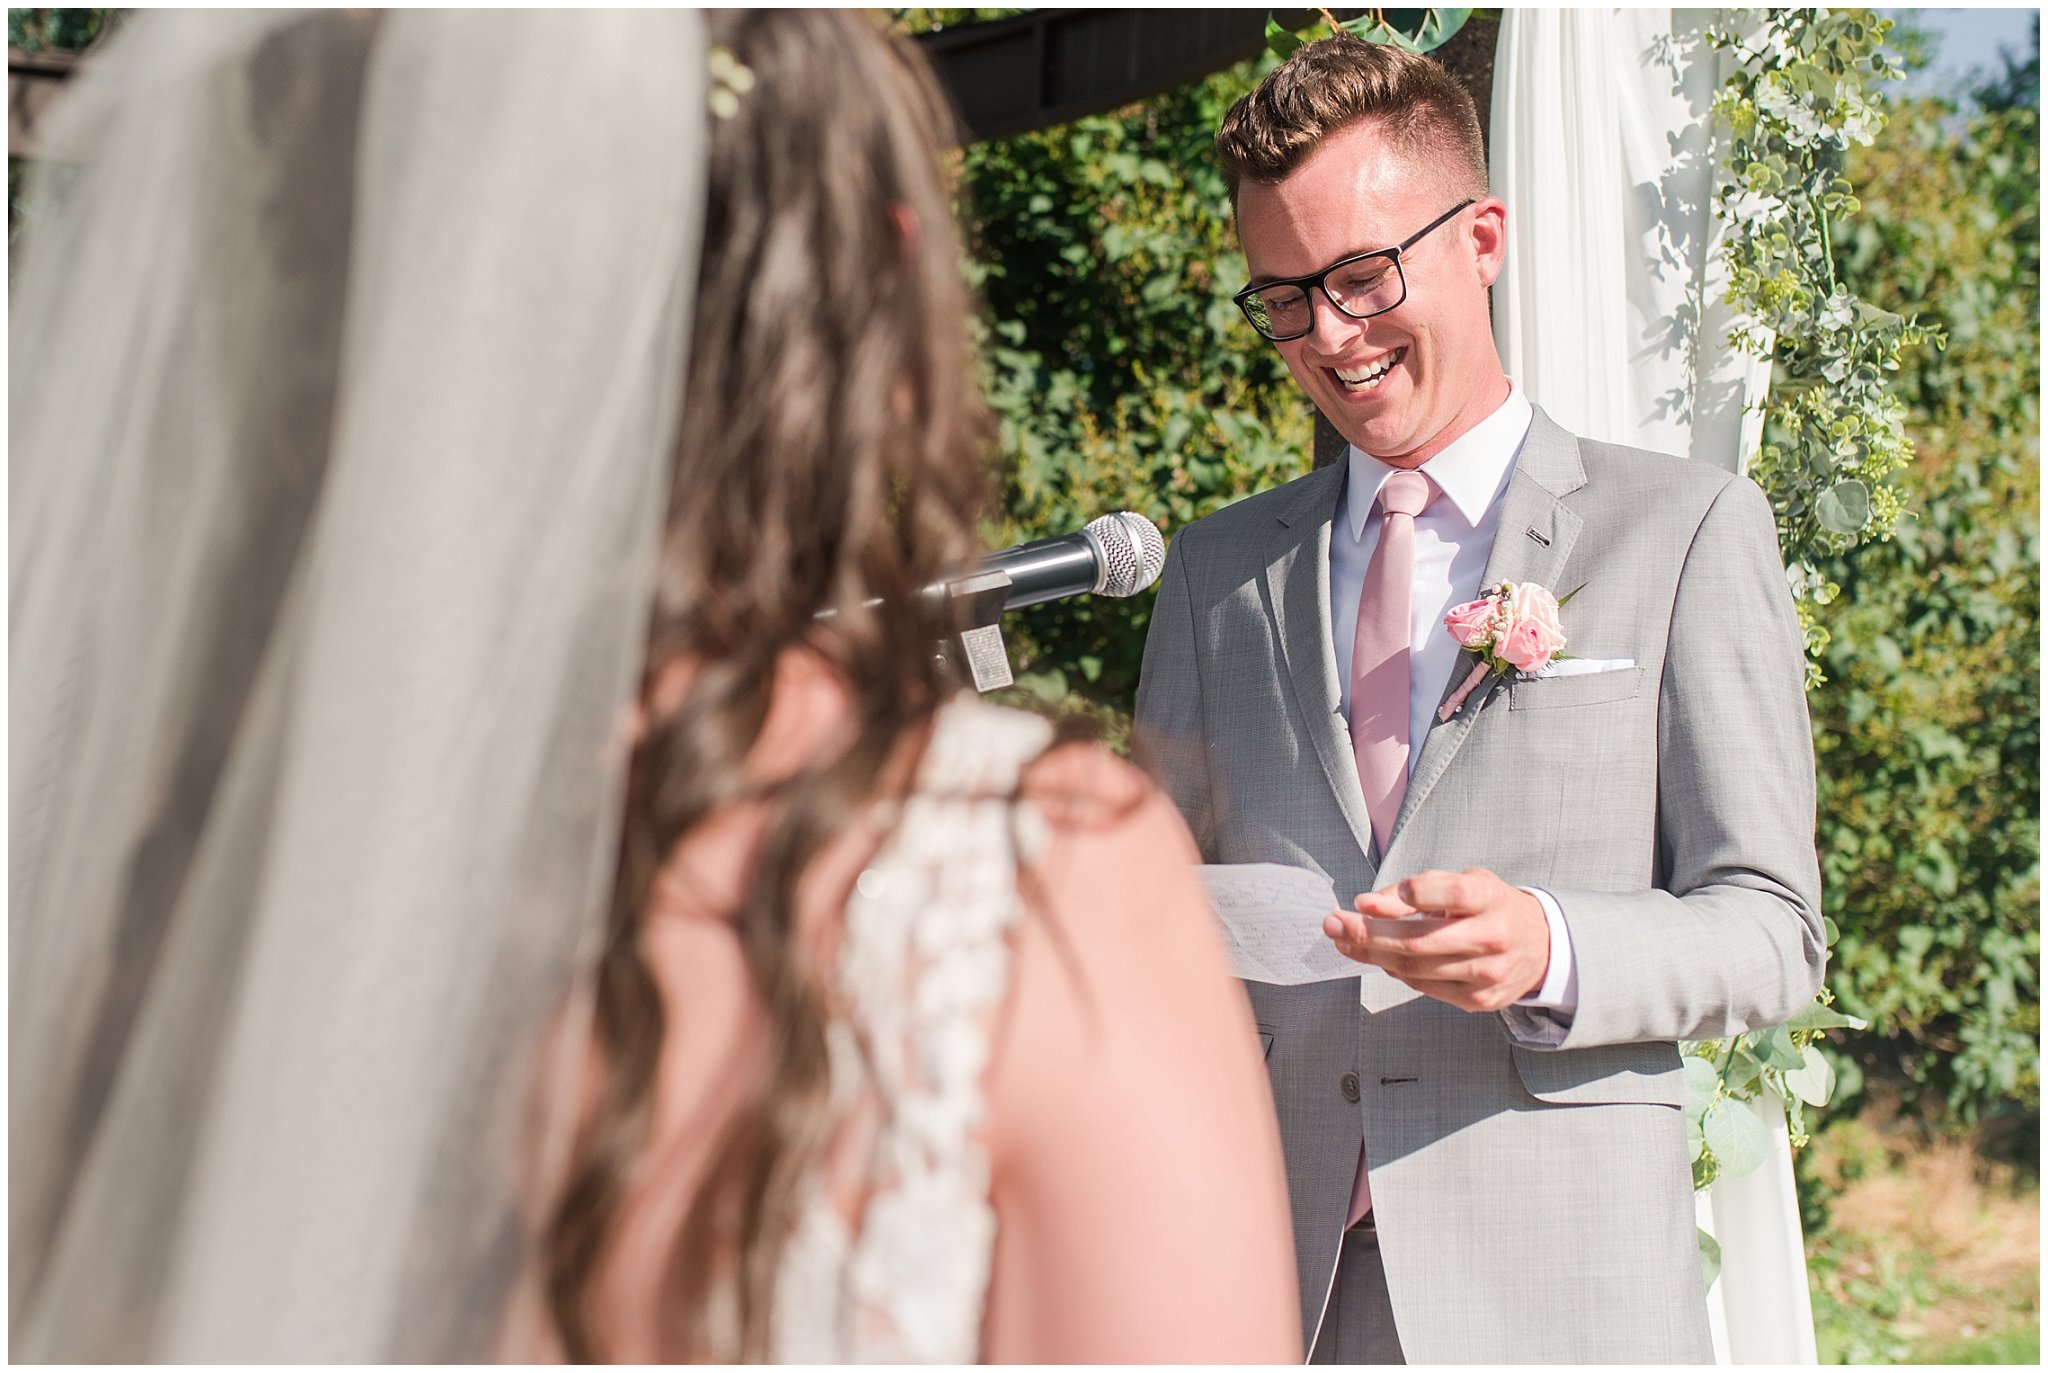 Groom reads vows during ceremony | Oak Hills Utah Dusty Rose and Gray Summer Wedding | Jessie and Dallin Photography